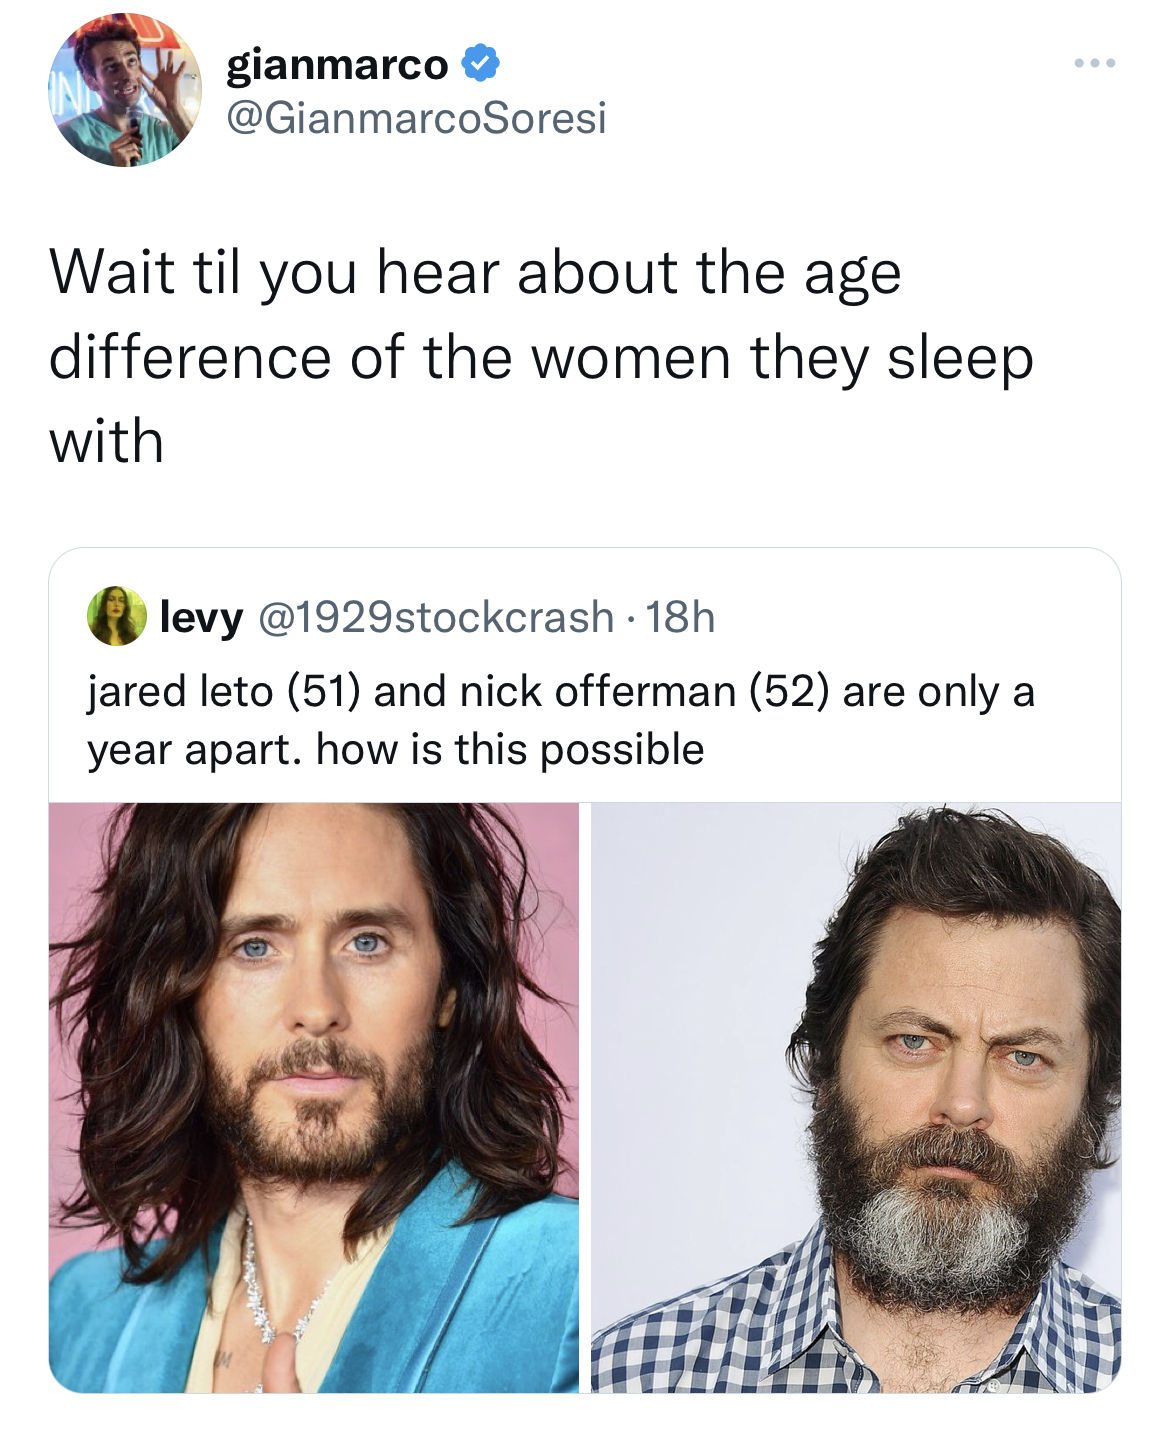 tweets dunking on celebs - facial expression - gianmarco Wait til you hear about the age difference of the women they sleep with levy jared leto 51 and nick offerman 52 are only a year apart. how is this possible B